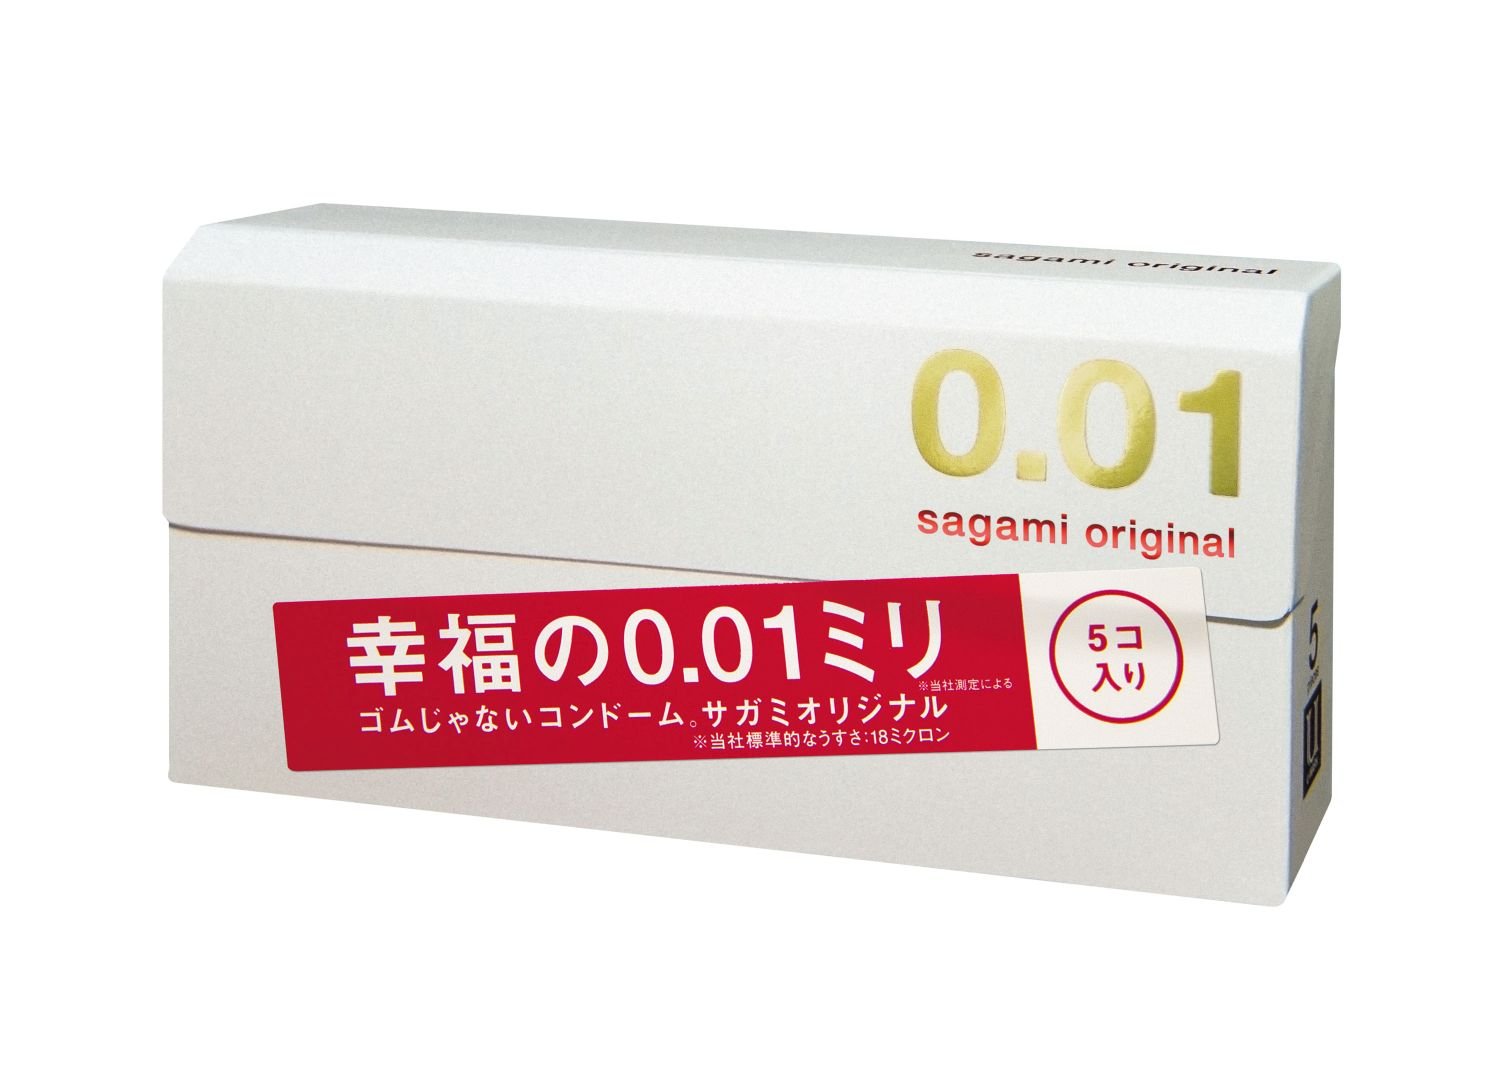 Sagami 0.01 Choosing The Best Japanese Condom Brand For You Both